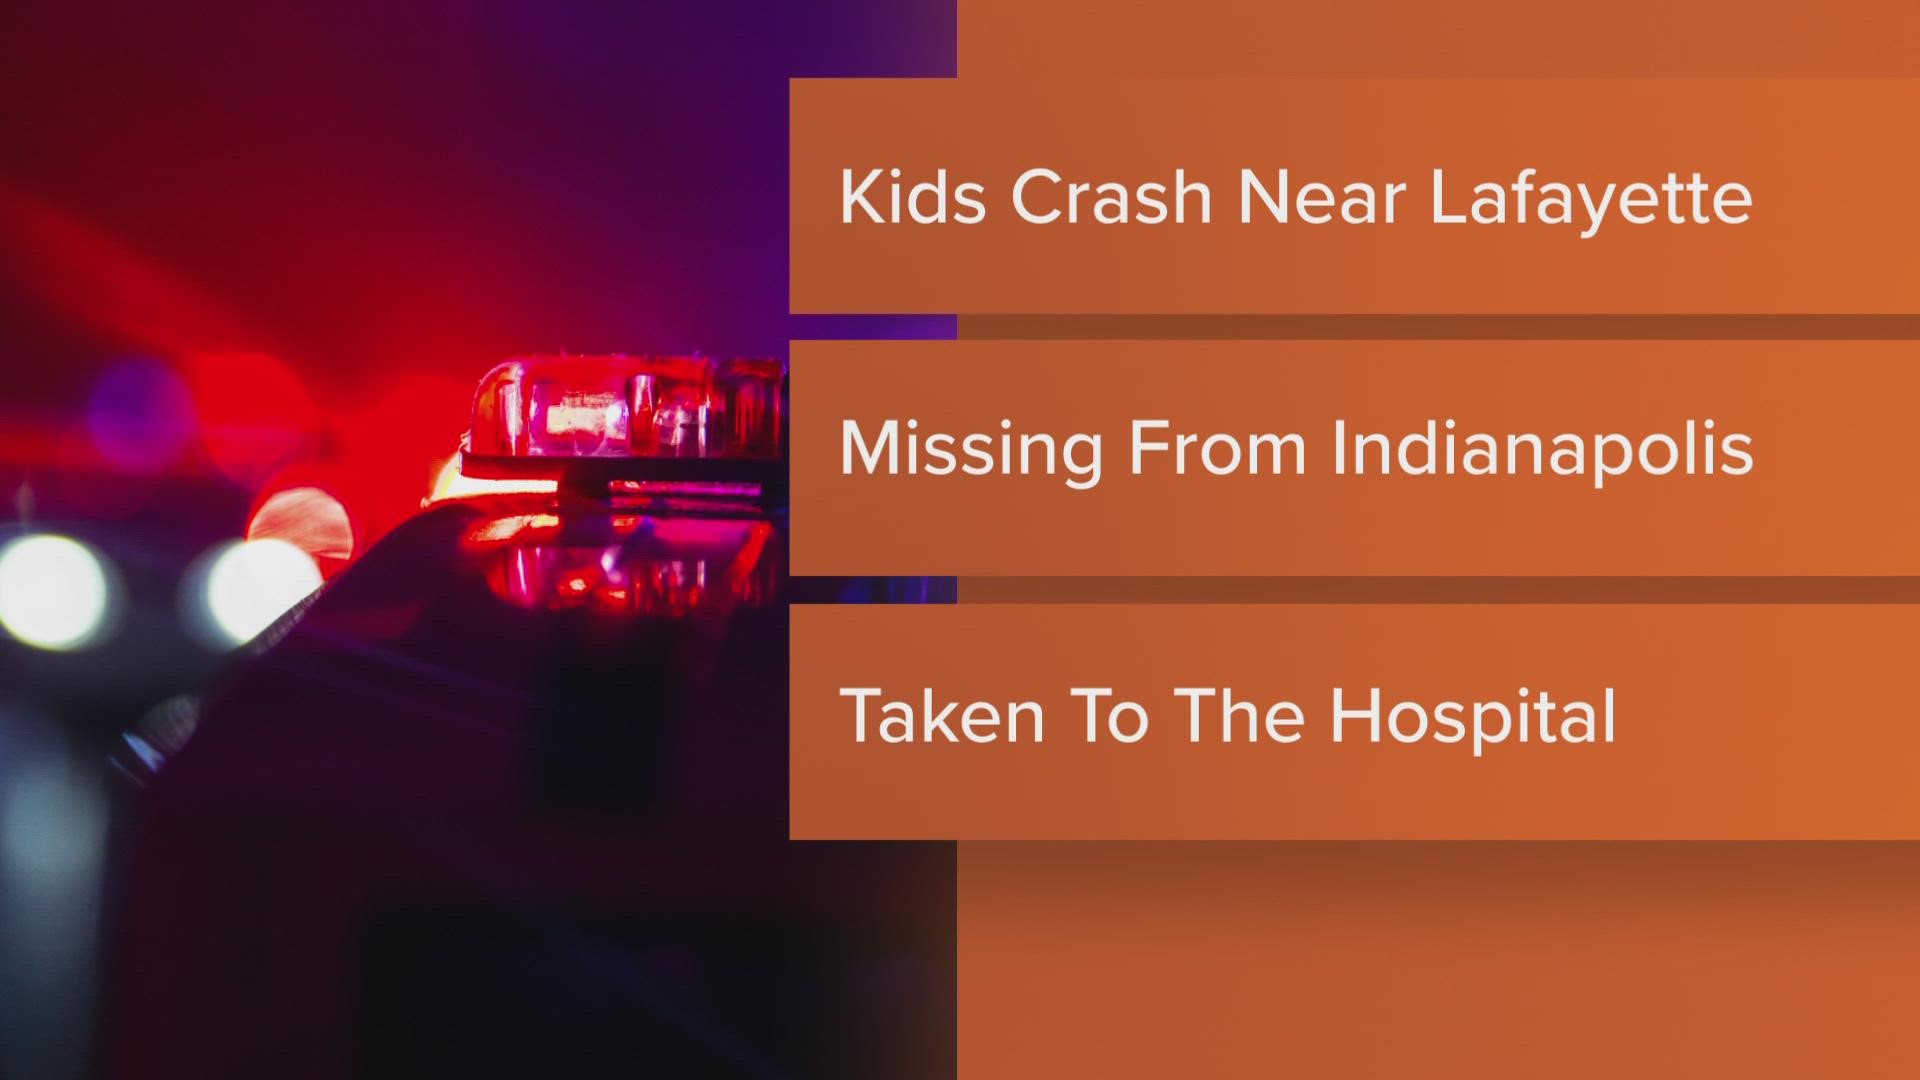 Police determined the three minors in the vehicle were all reported missing from Indianapolis on Tuesday, Dec. 20.